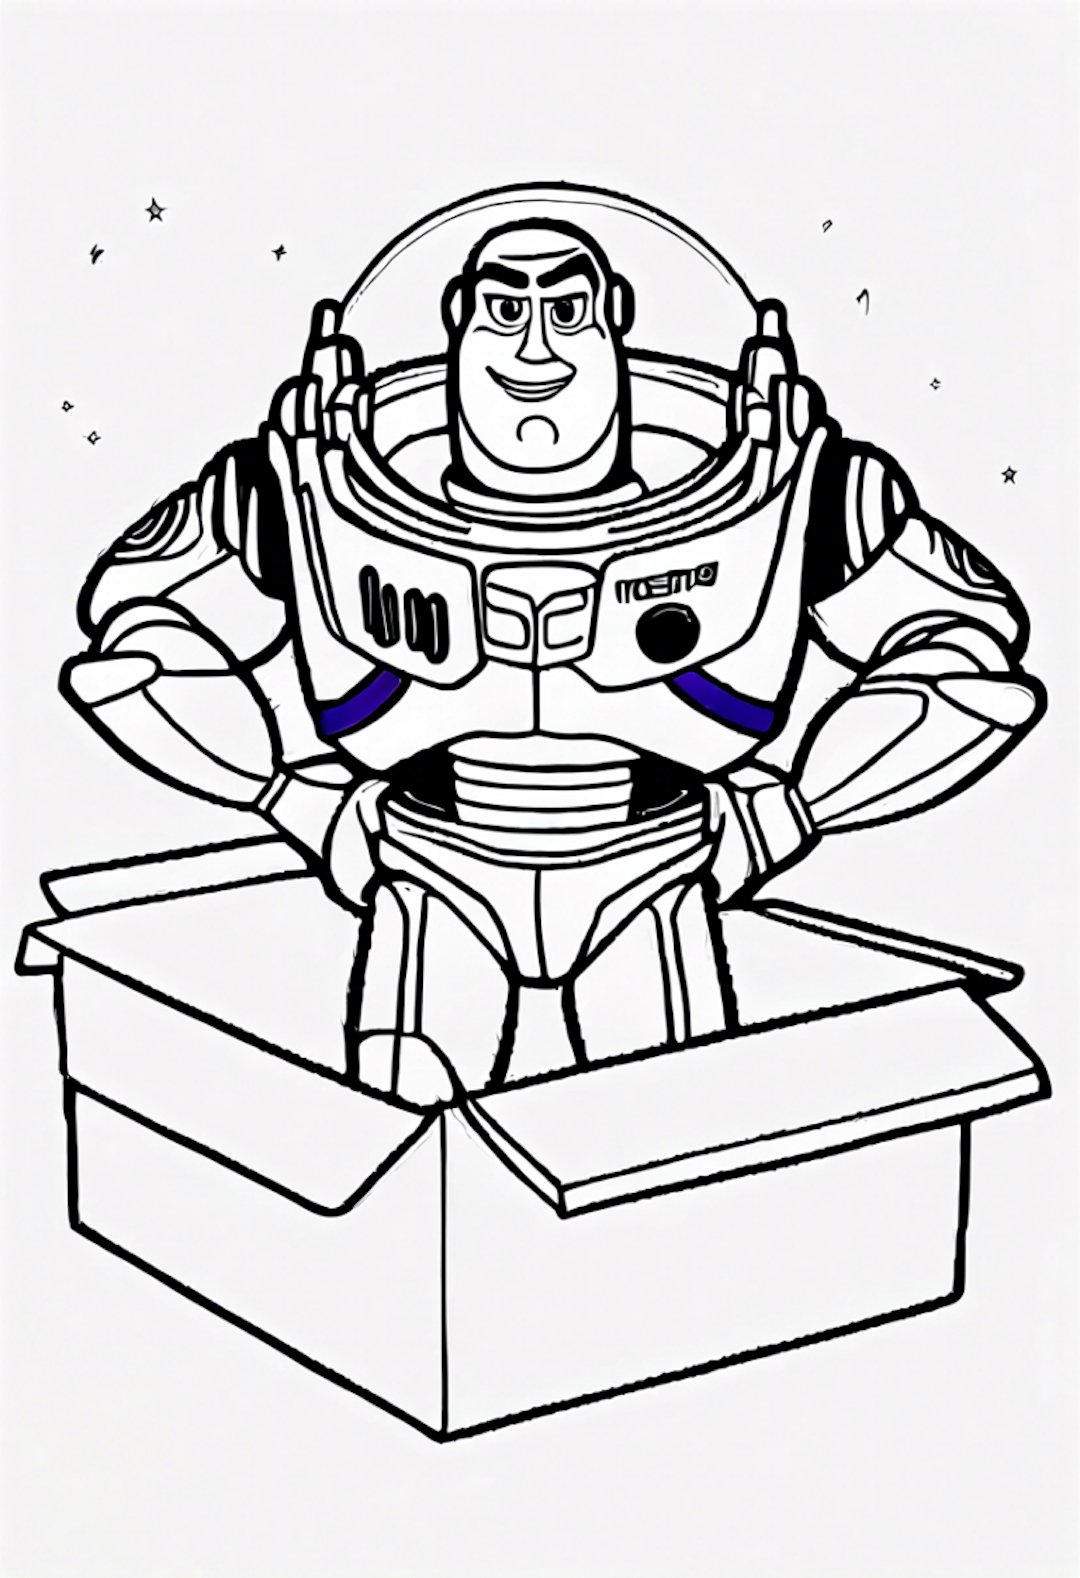 Buzz Lightyear’s Adventure in a Box coloring pages